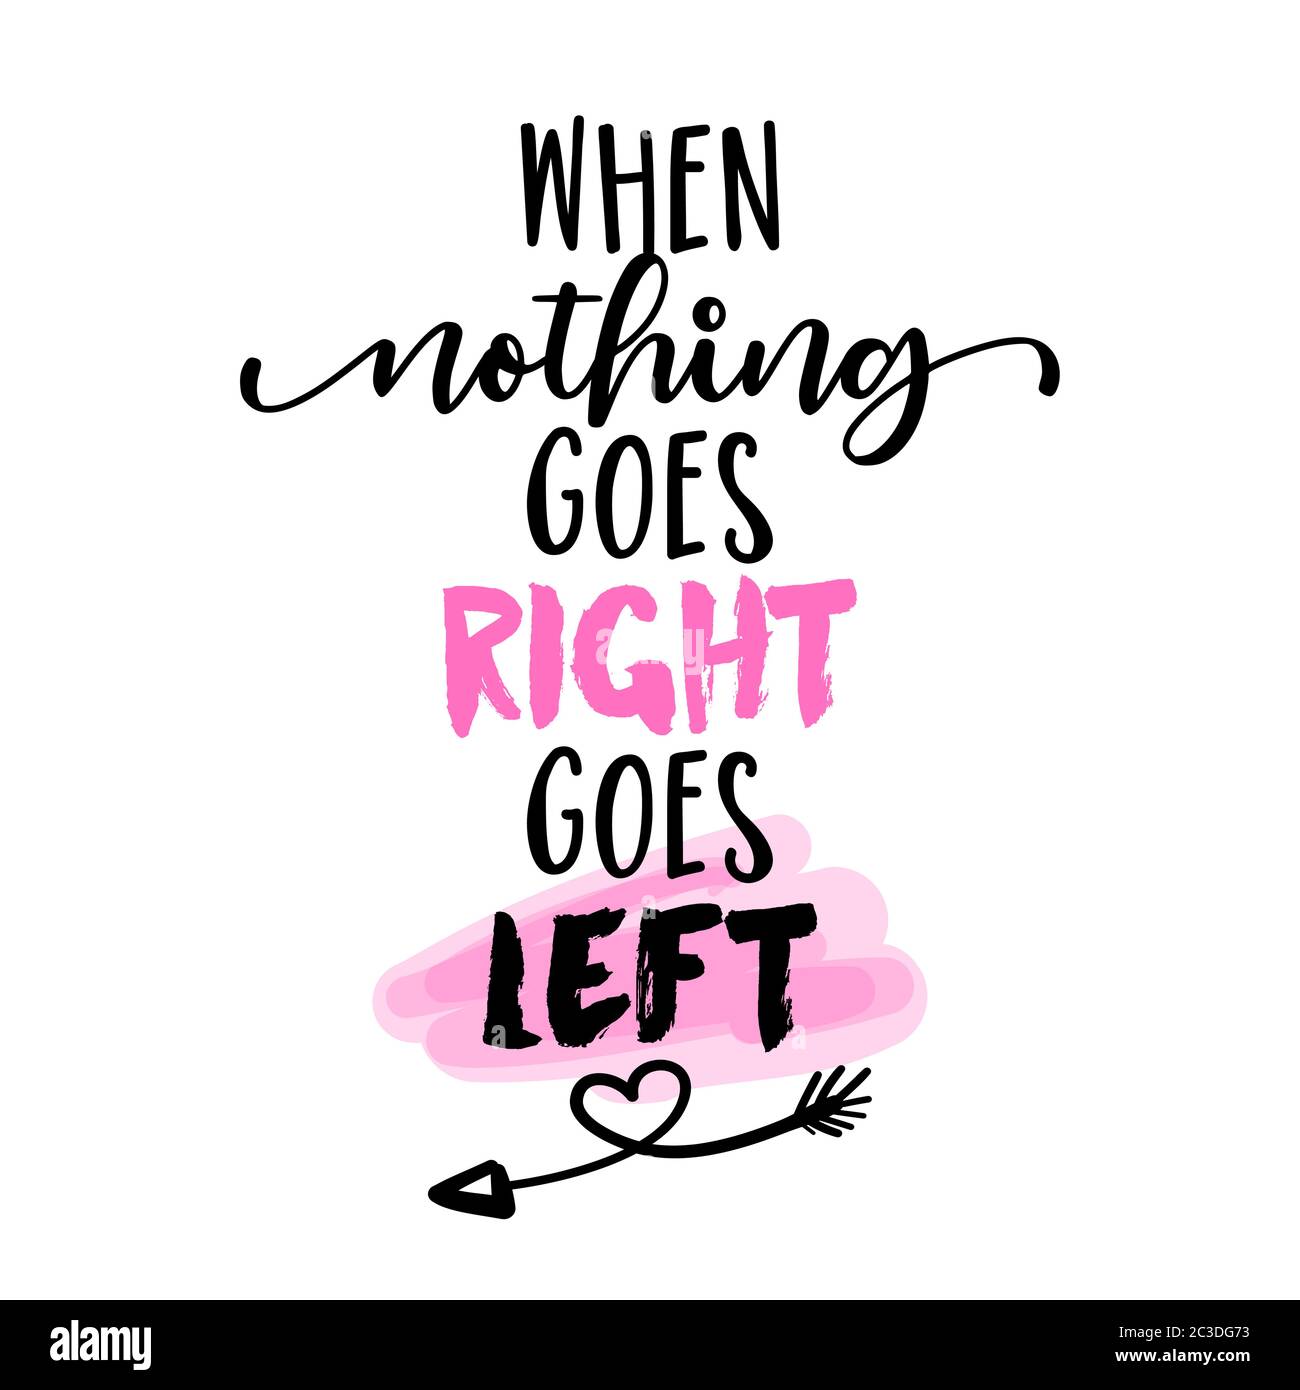 When nothing goes right, goes left - Lettering inspiring calligraphy poster with text. Greeting card for stay at home for quarantine times. Hand drawn Stock Vector